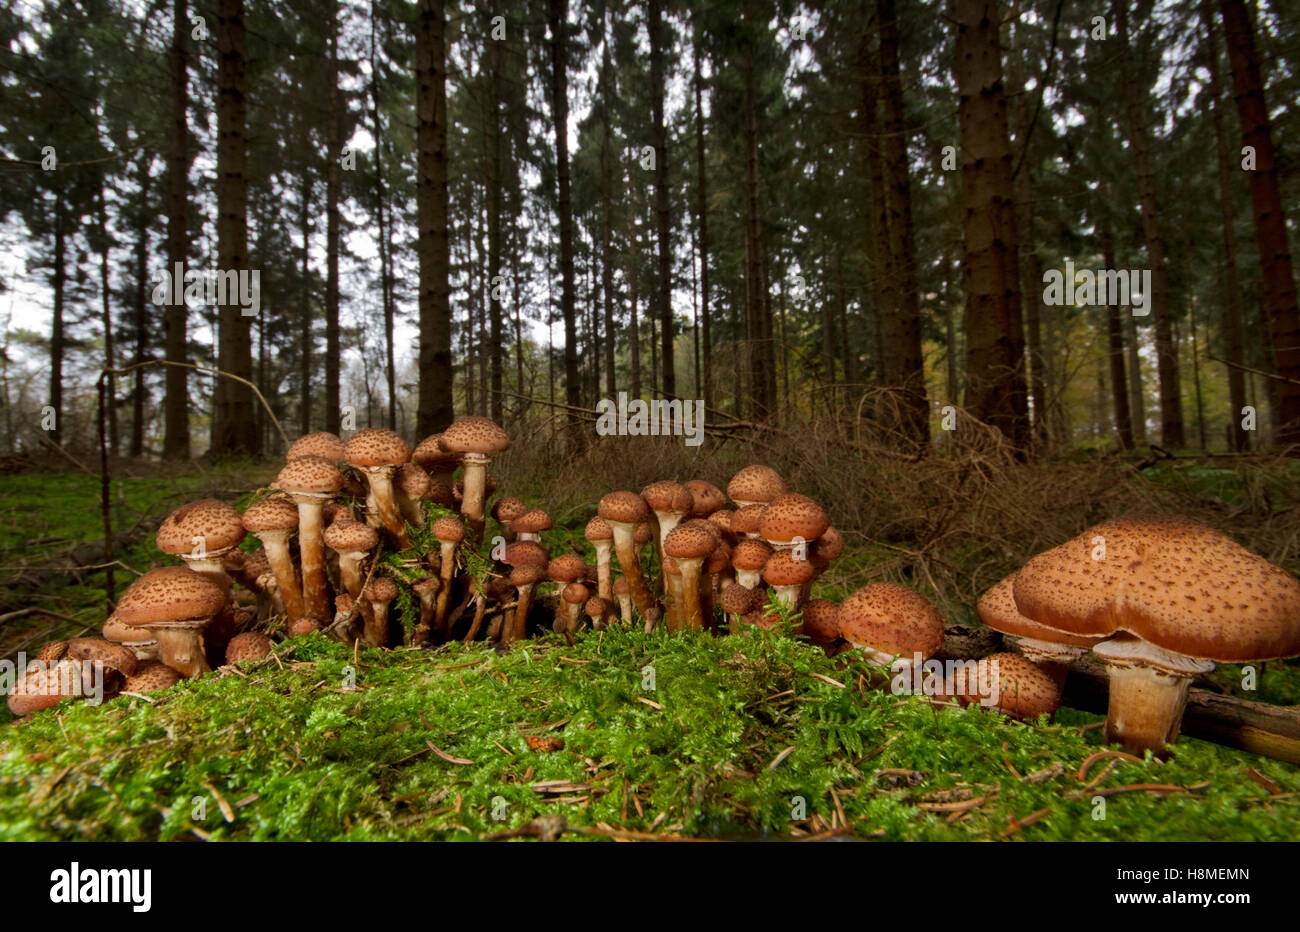 Group of Freckled Dapperling mushrooms (Lepiota aspera) on a tree trunk in a pine forest Stock Photo